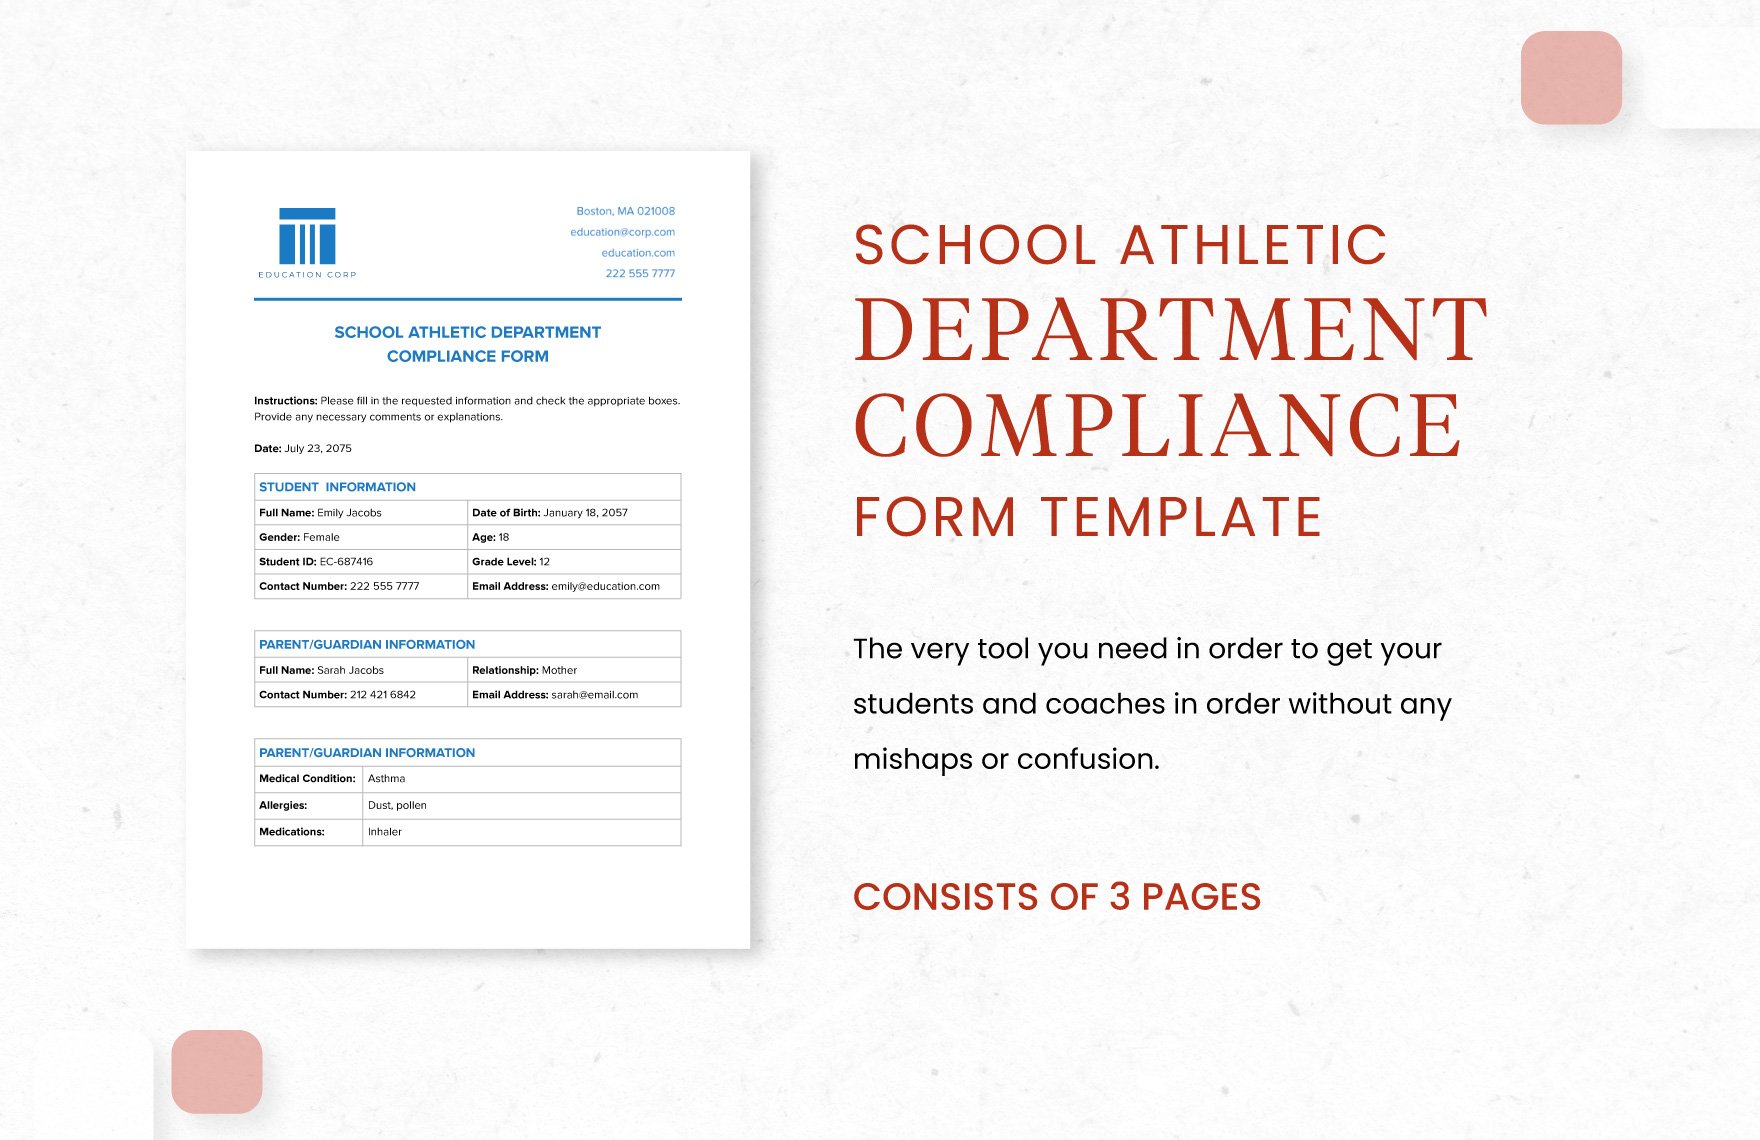 School Athletic Department Compliance Form Template in Word, Google Docs, PDF